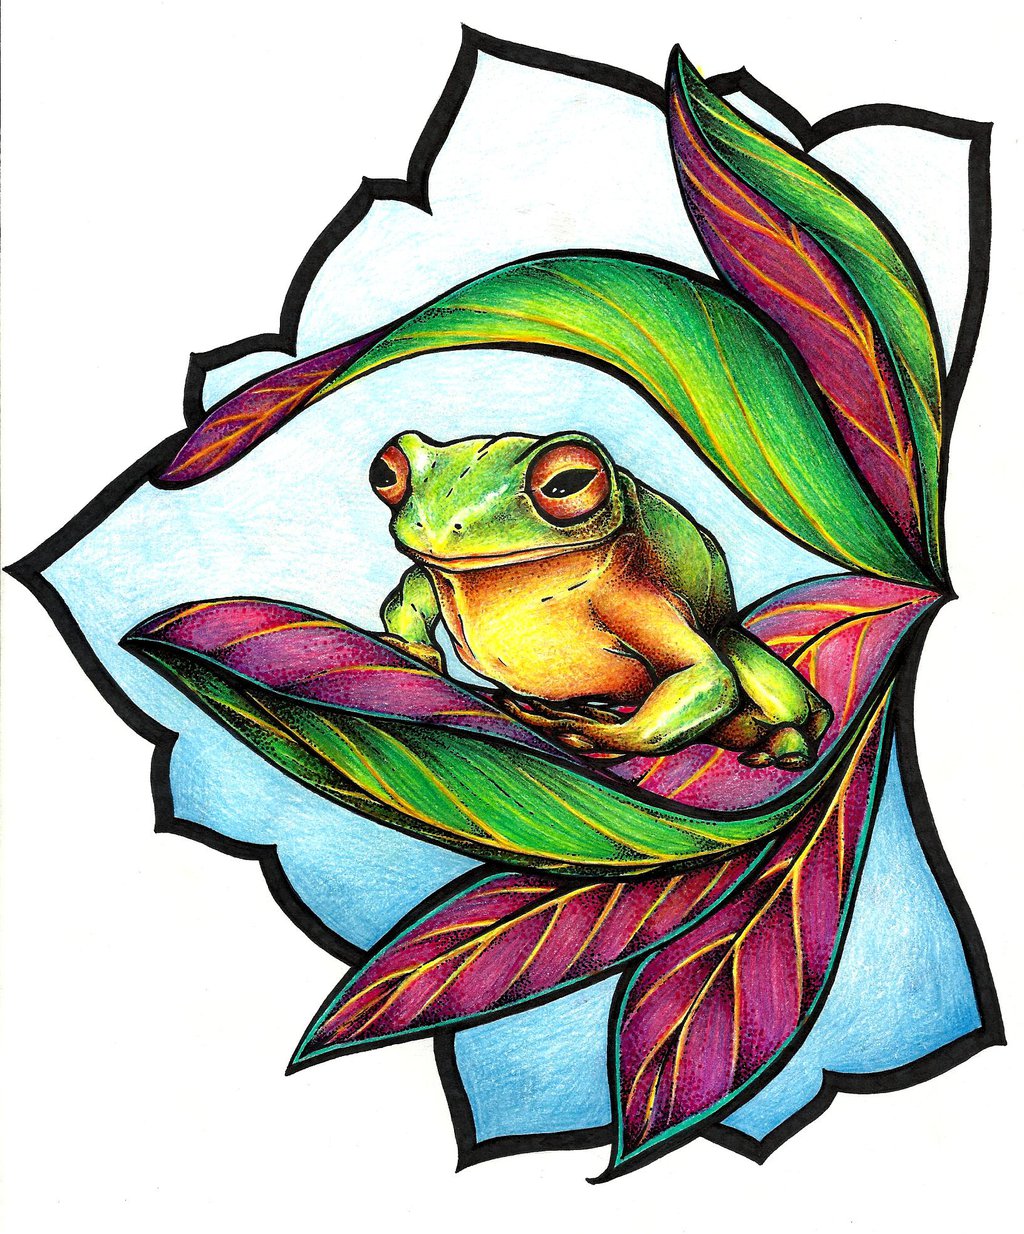 Frog Tattoo Pictures